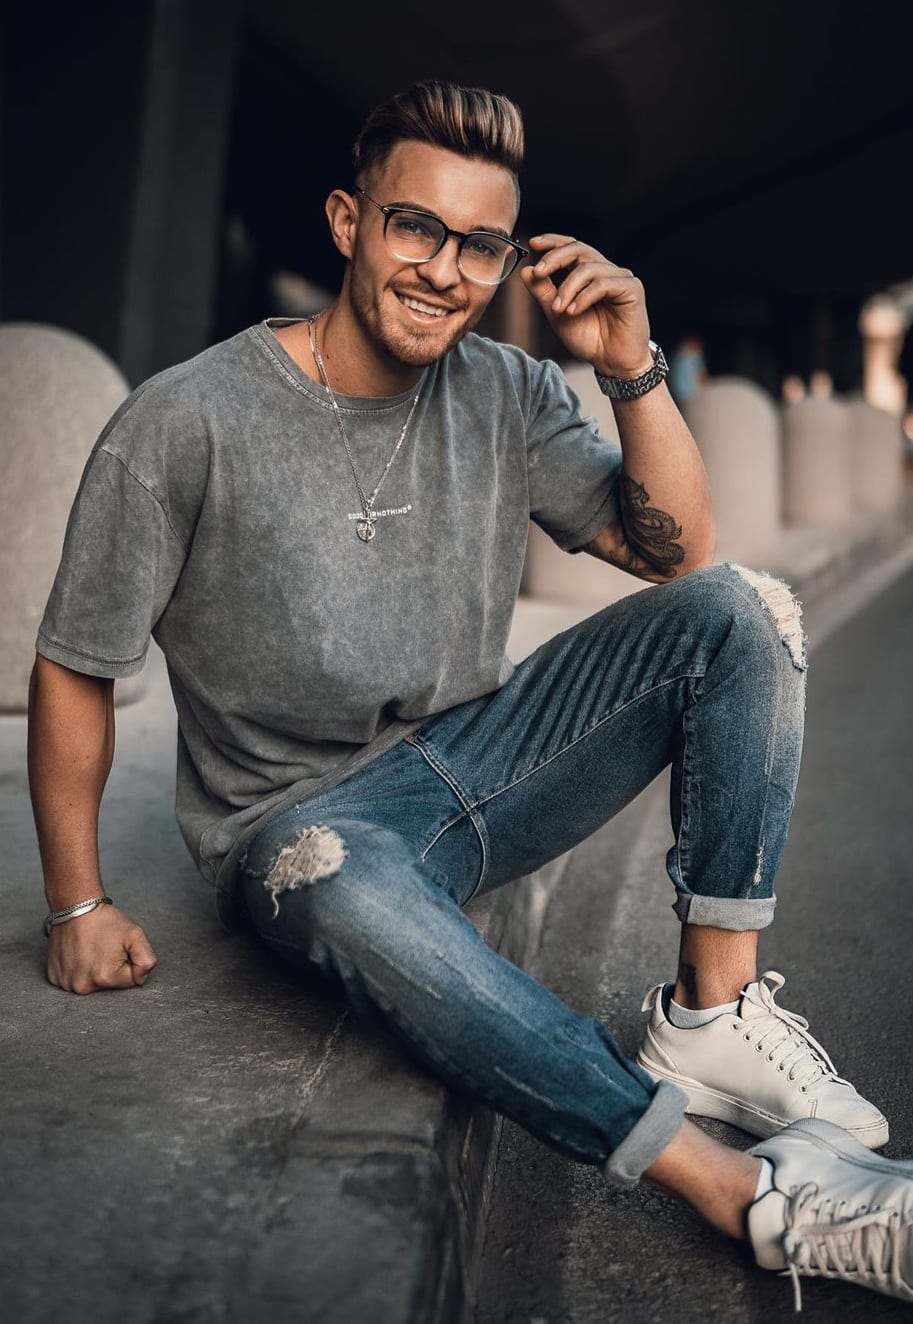 Nerd Glasses, Ripped Denims and Tee Outfit- Nerdy Boy 2020